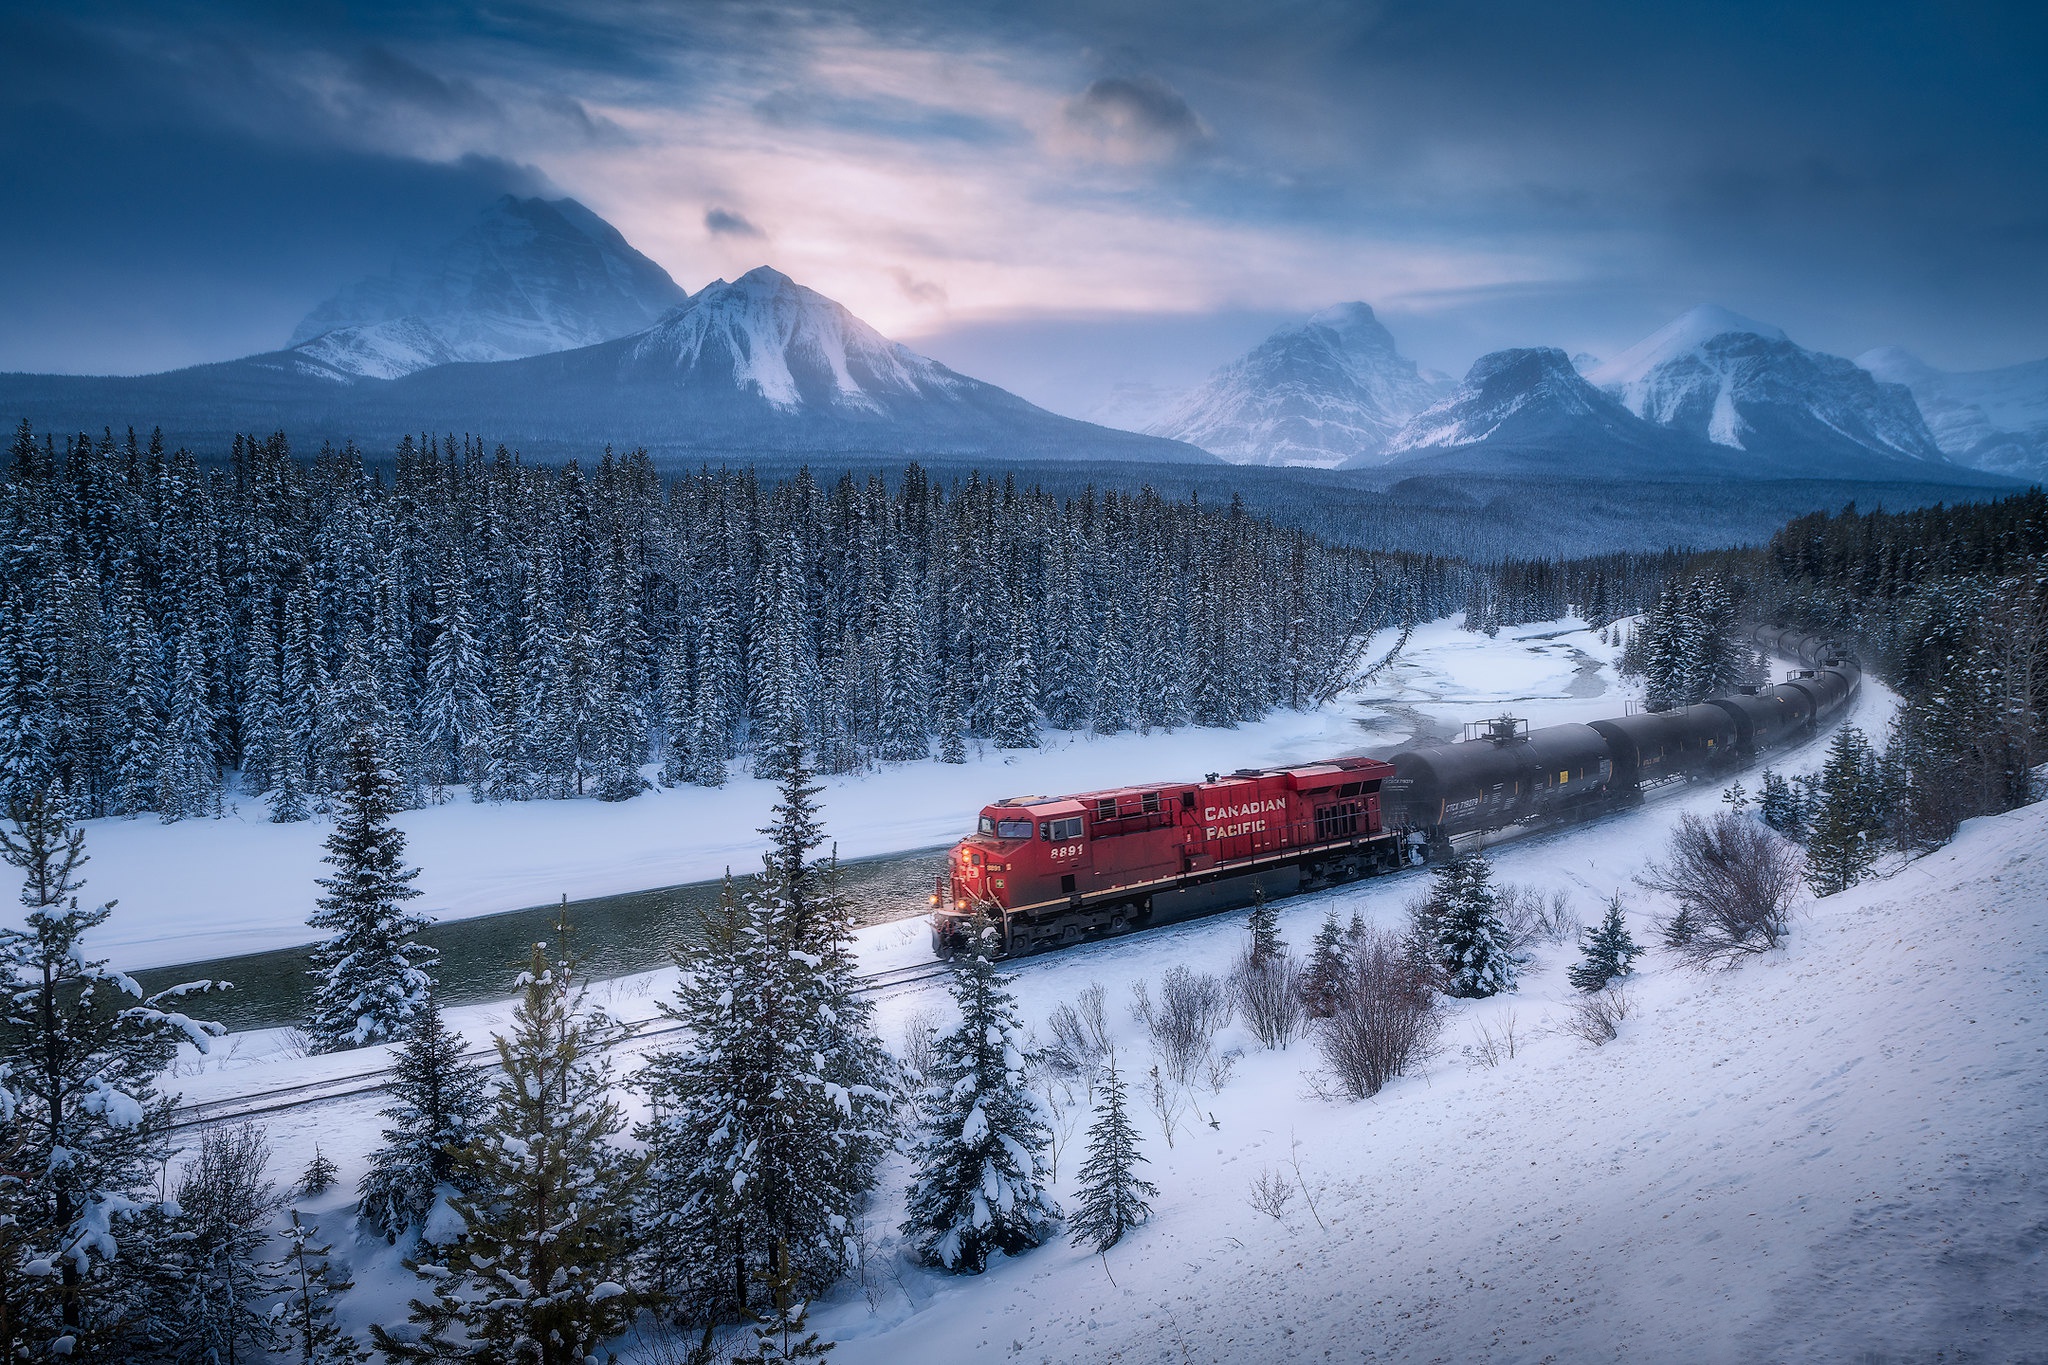 HD desktop wallpaper: Winter, Snow, Mountain, Canada, Forest, Train, Banff  National Park, Vehicles download free picture #1000424